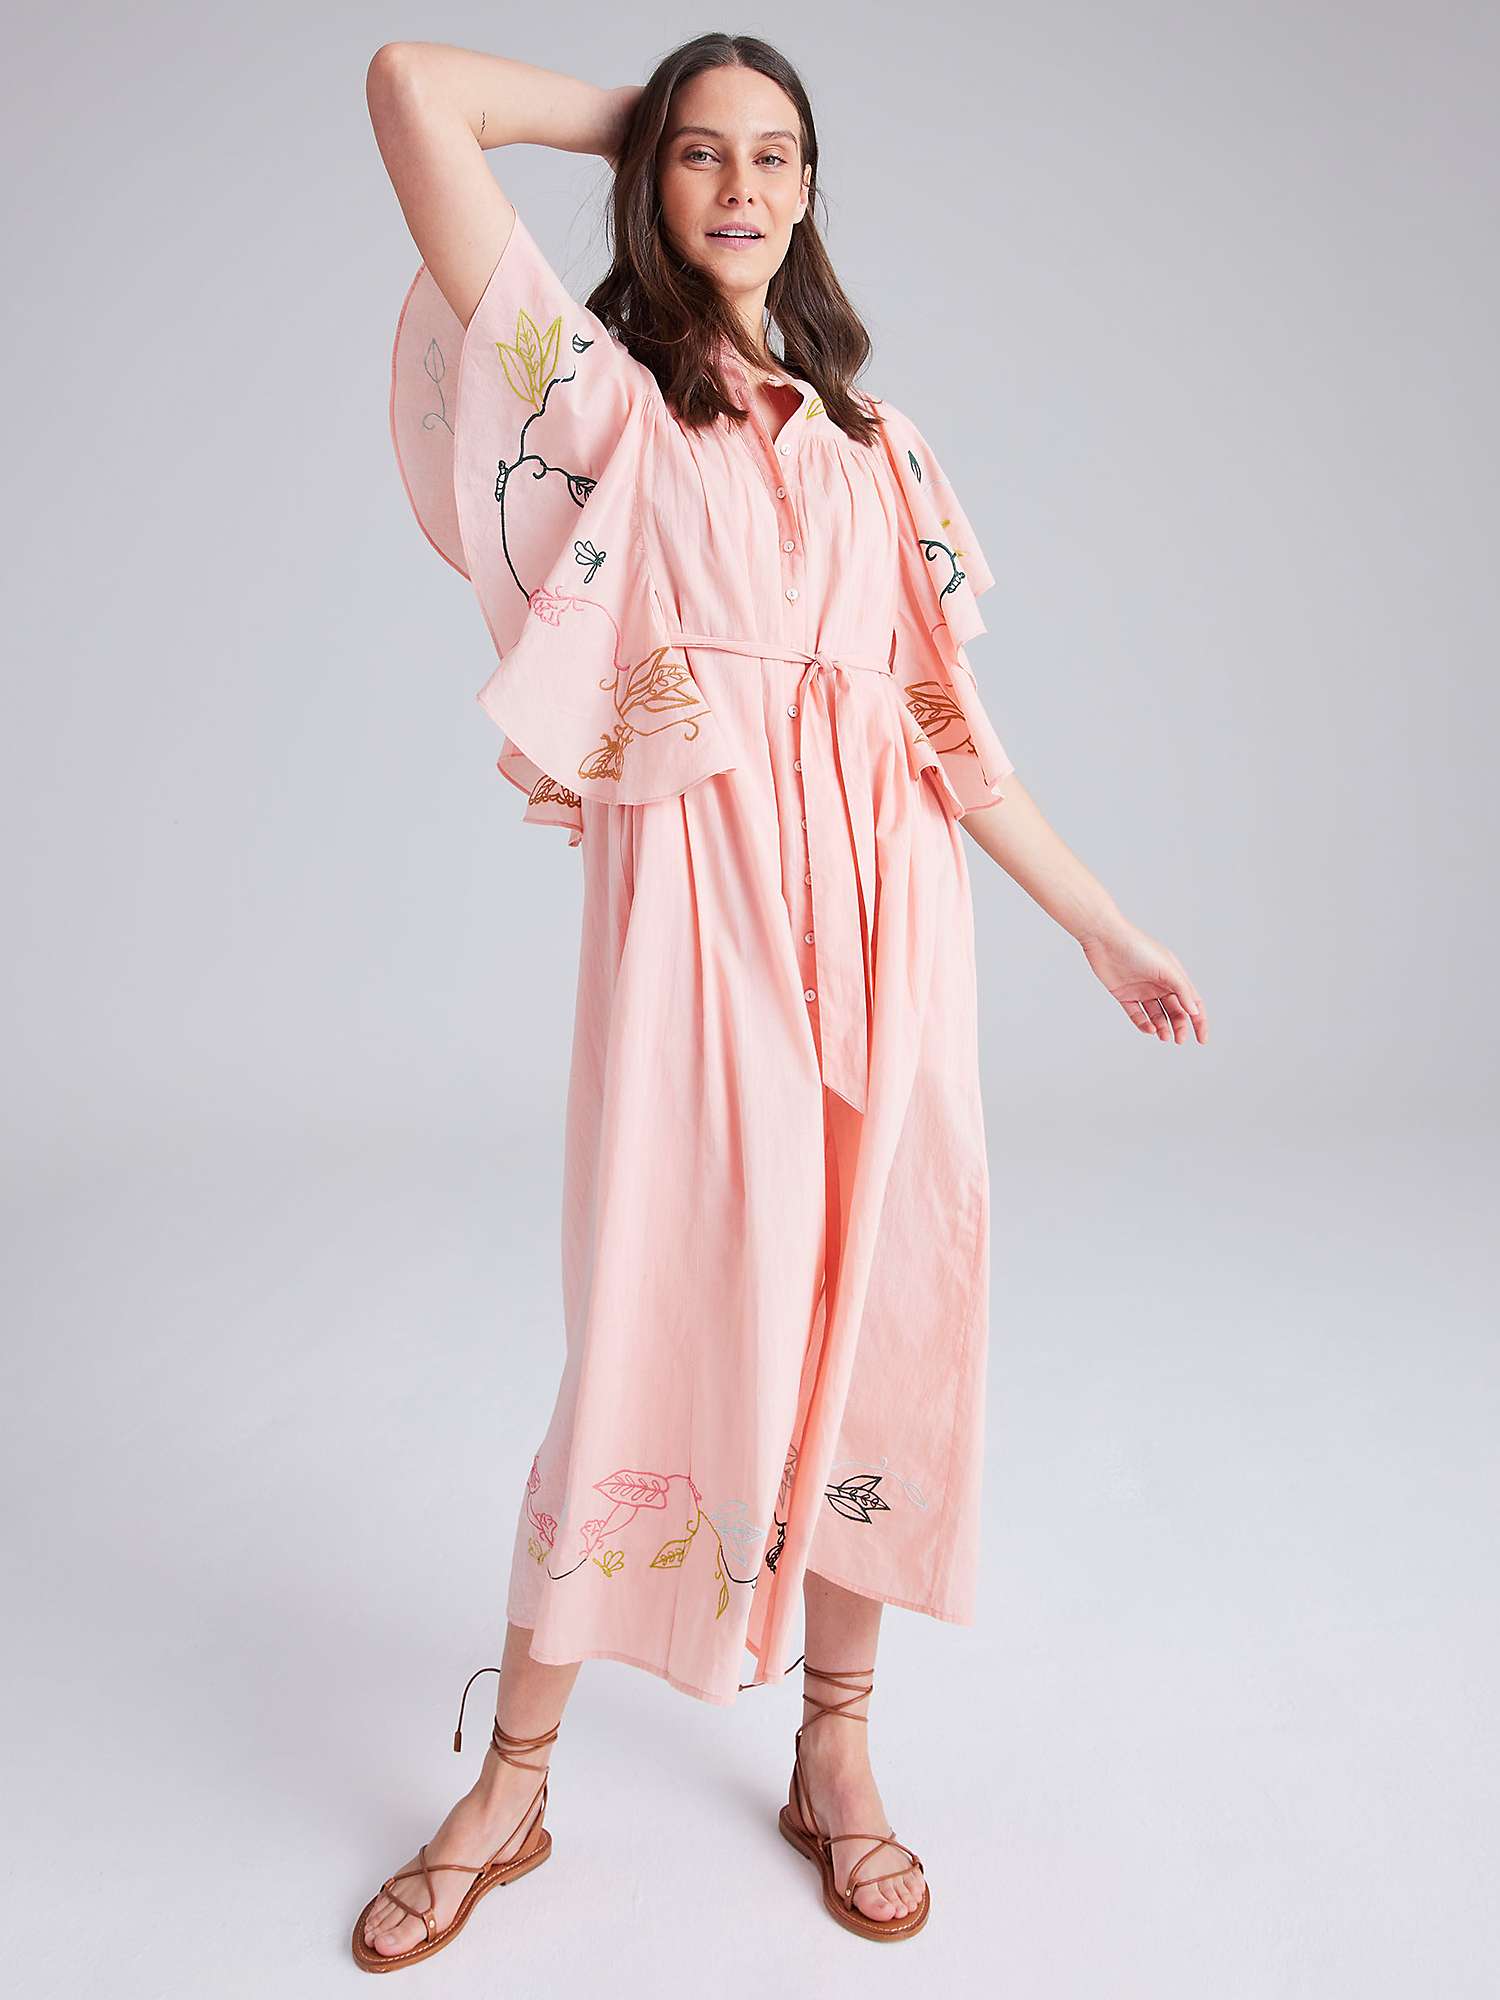 Buy Cape Cove Botanical Embroidered Ruffle Midi Dress, Dubarry Online at johnlewis.com